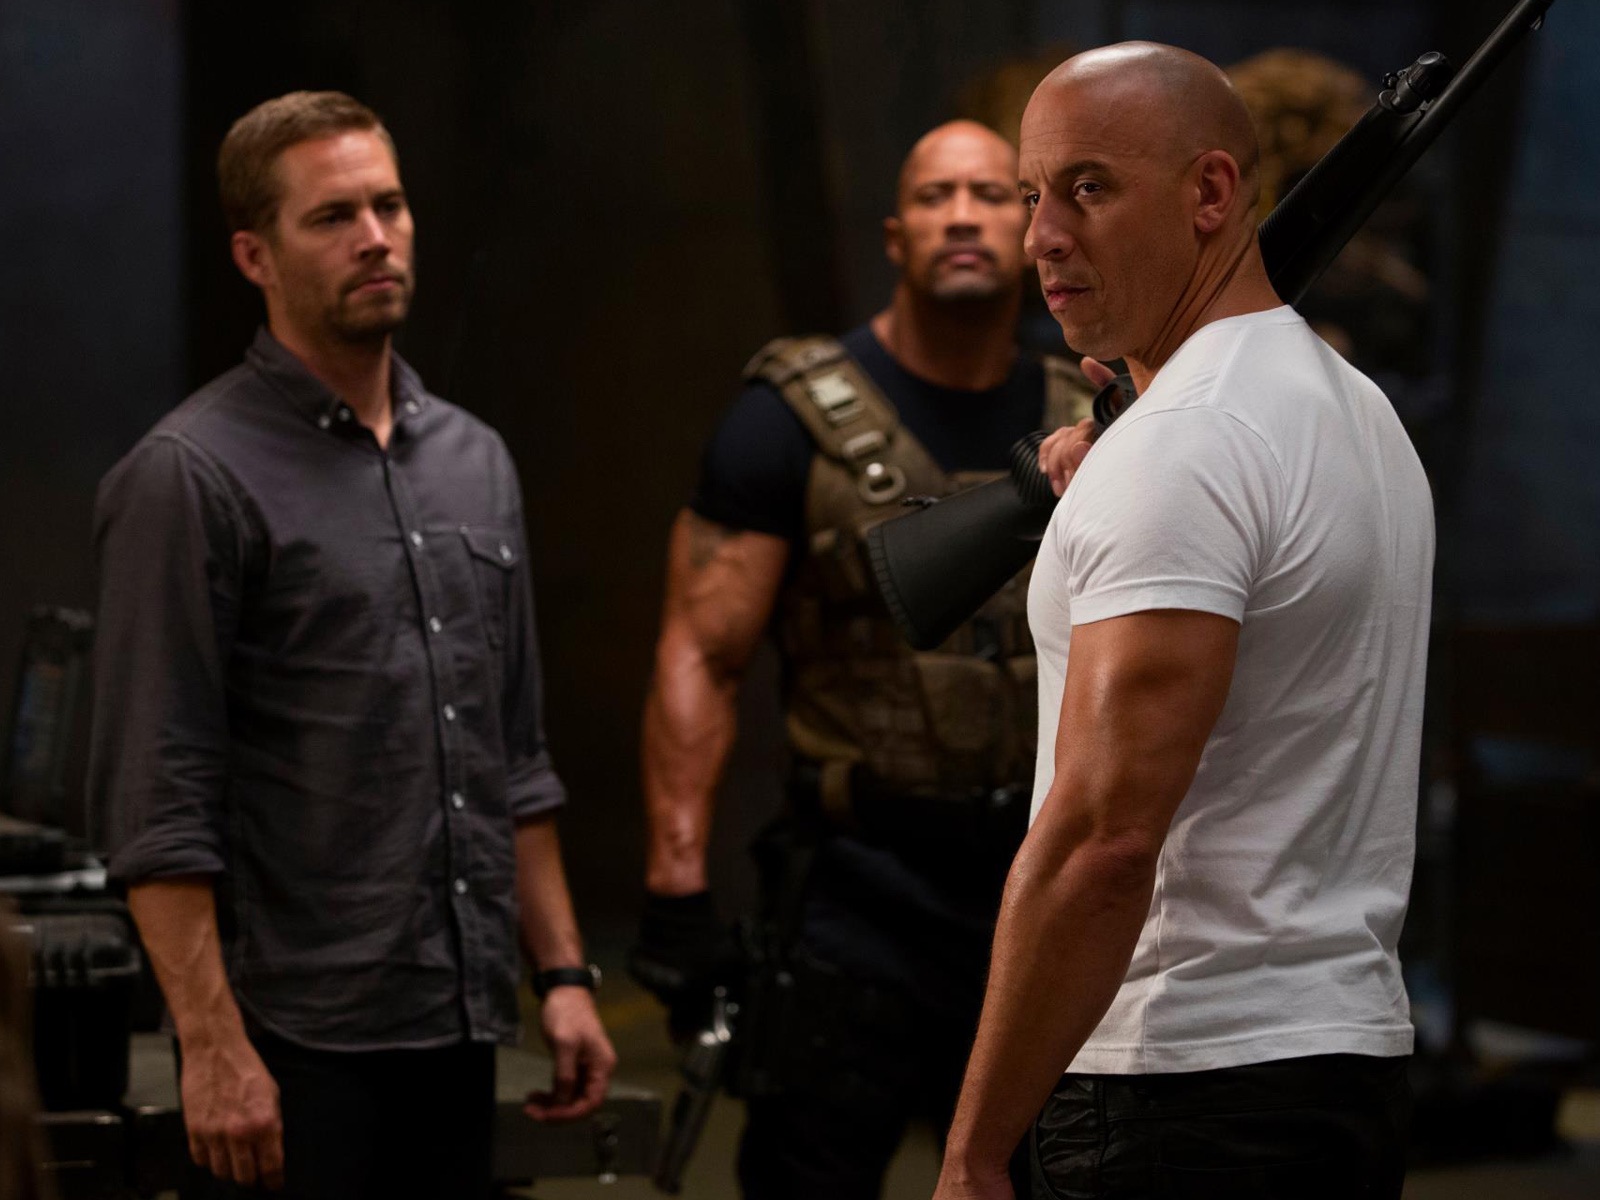 Fast And Furious 6 HD movie wallpapers #5 - 1600x1200